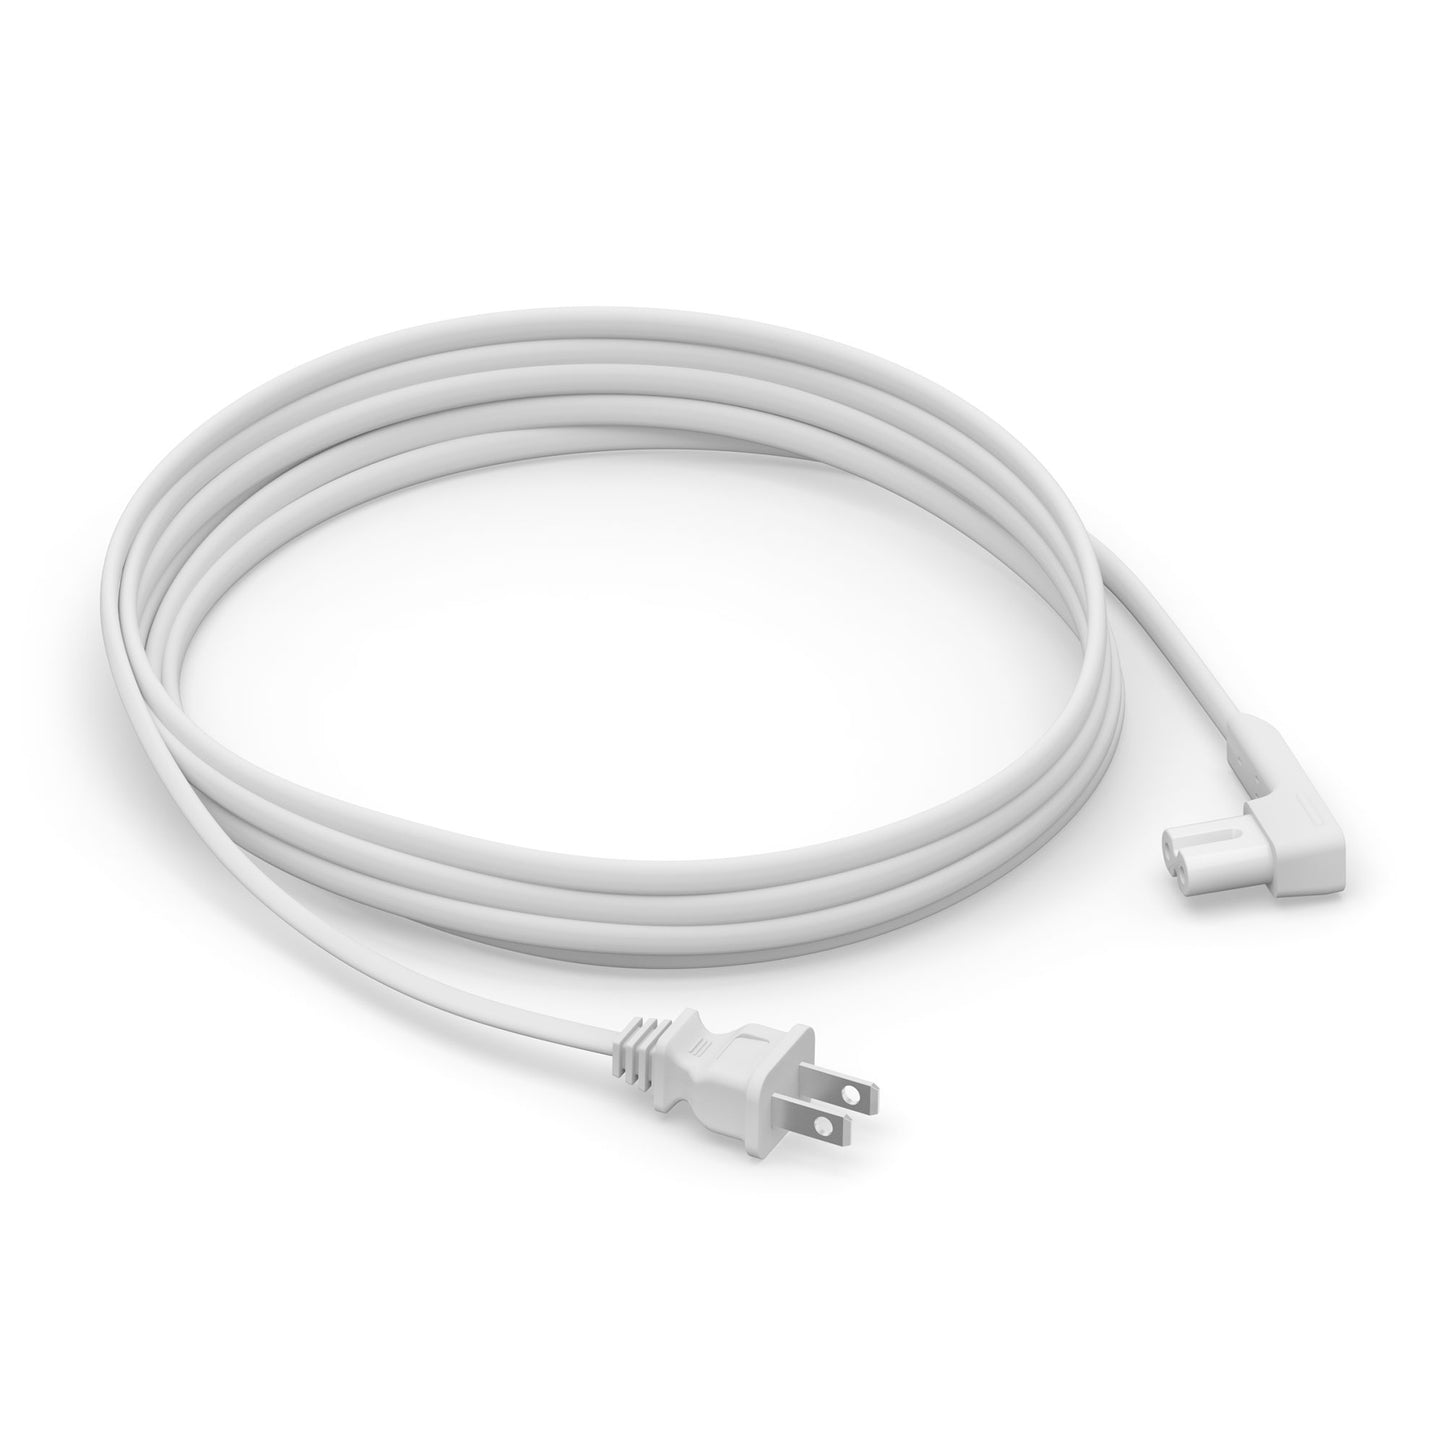 Sonos Power Cable 11.5ft (White) - Top View